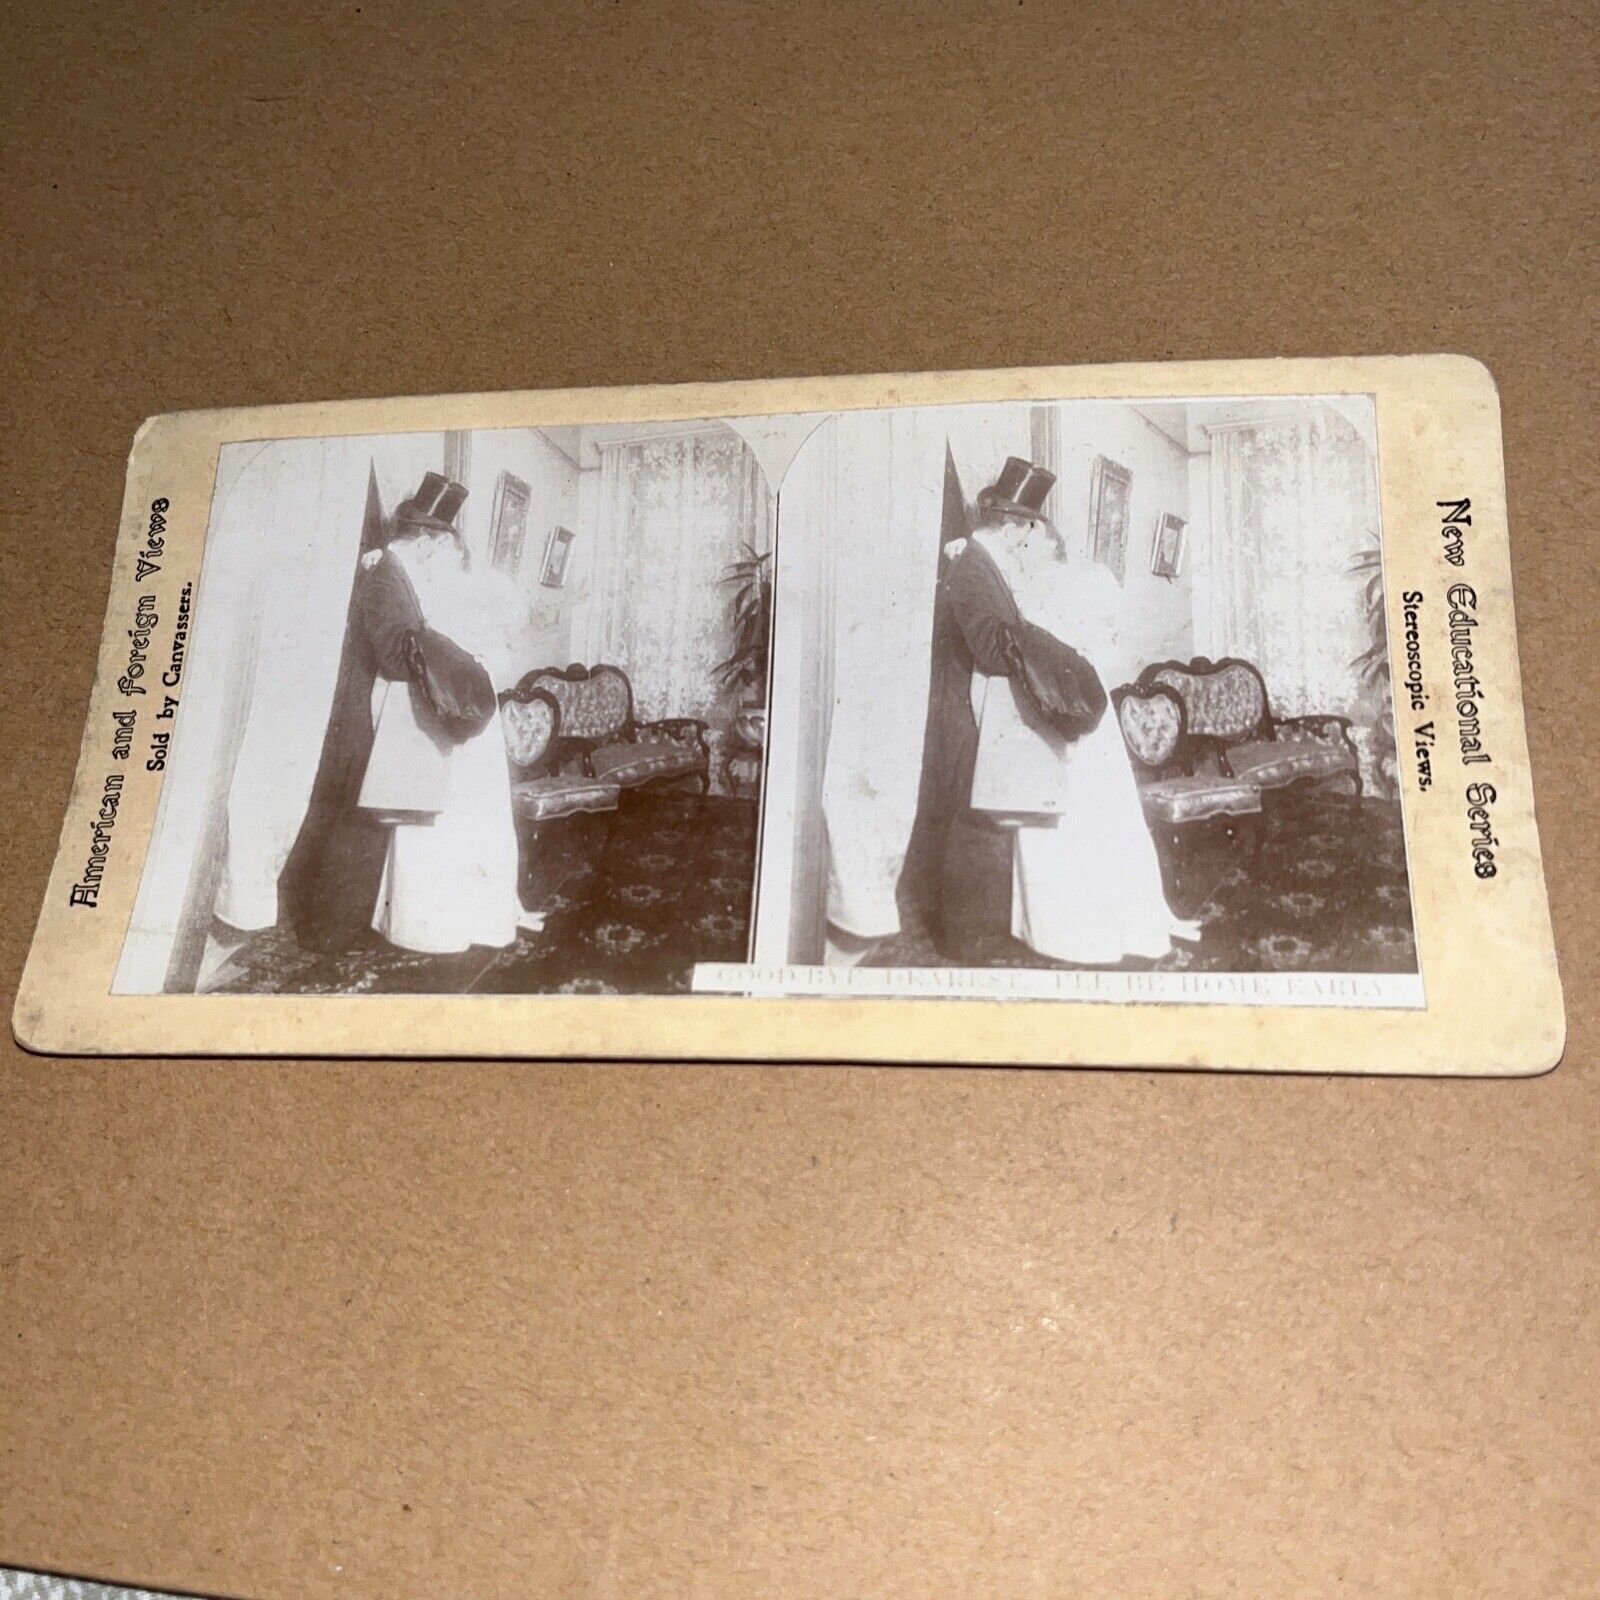 Antique Stereoview Card Photo: Goodbye Dearest I’ll Be Home Early Kissing Woman